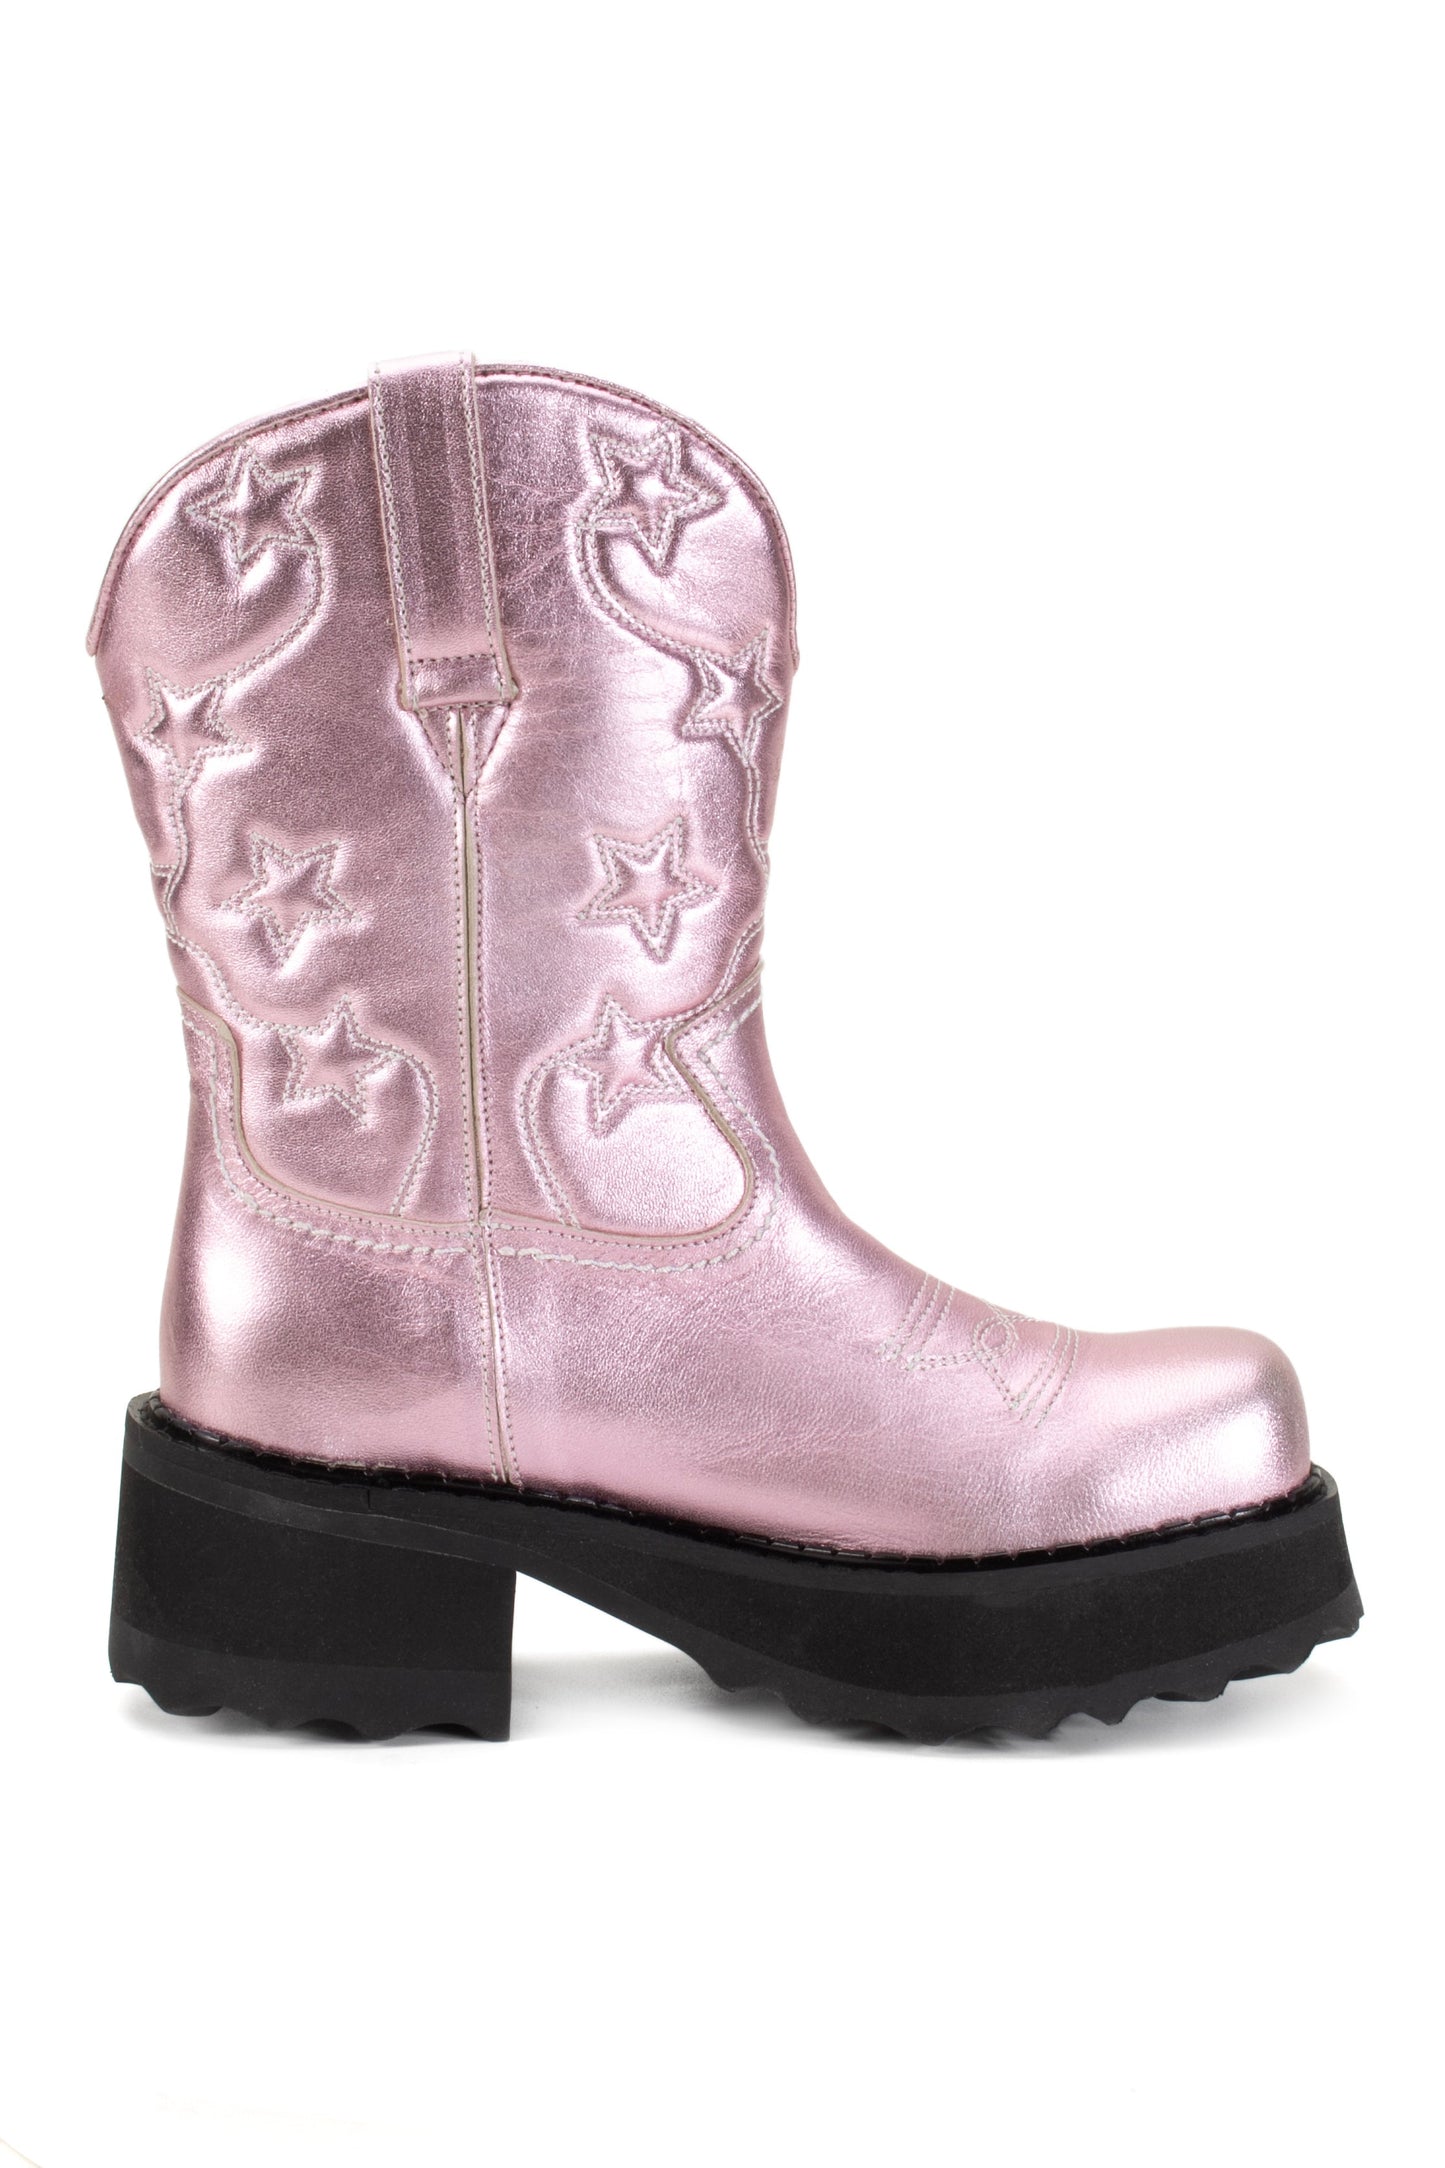 Mid-size boots, Western style look, engraved lone-stars front and back